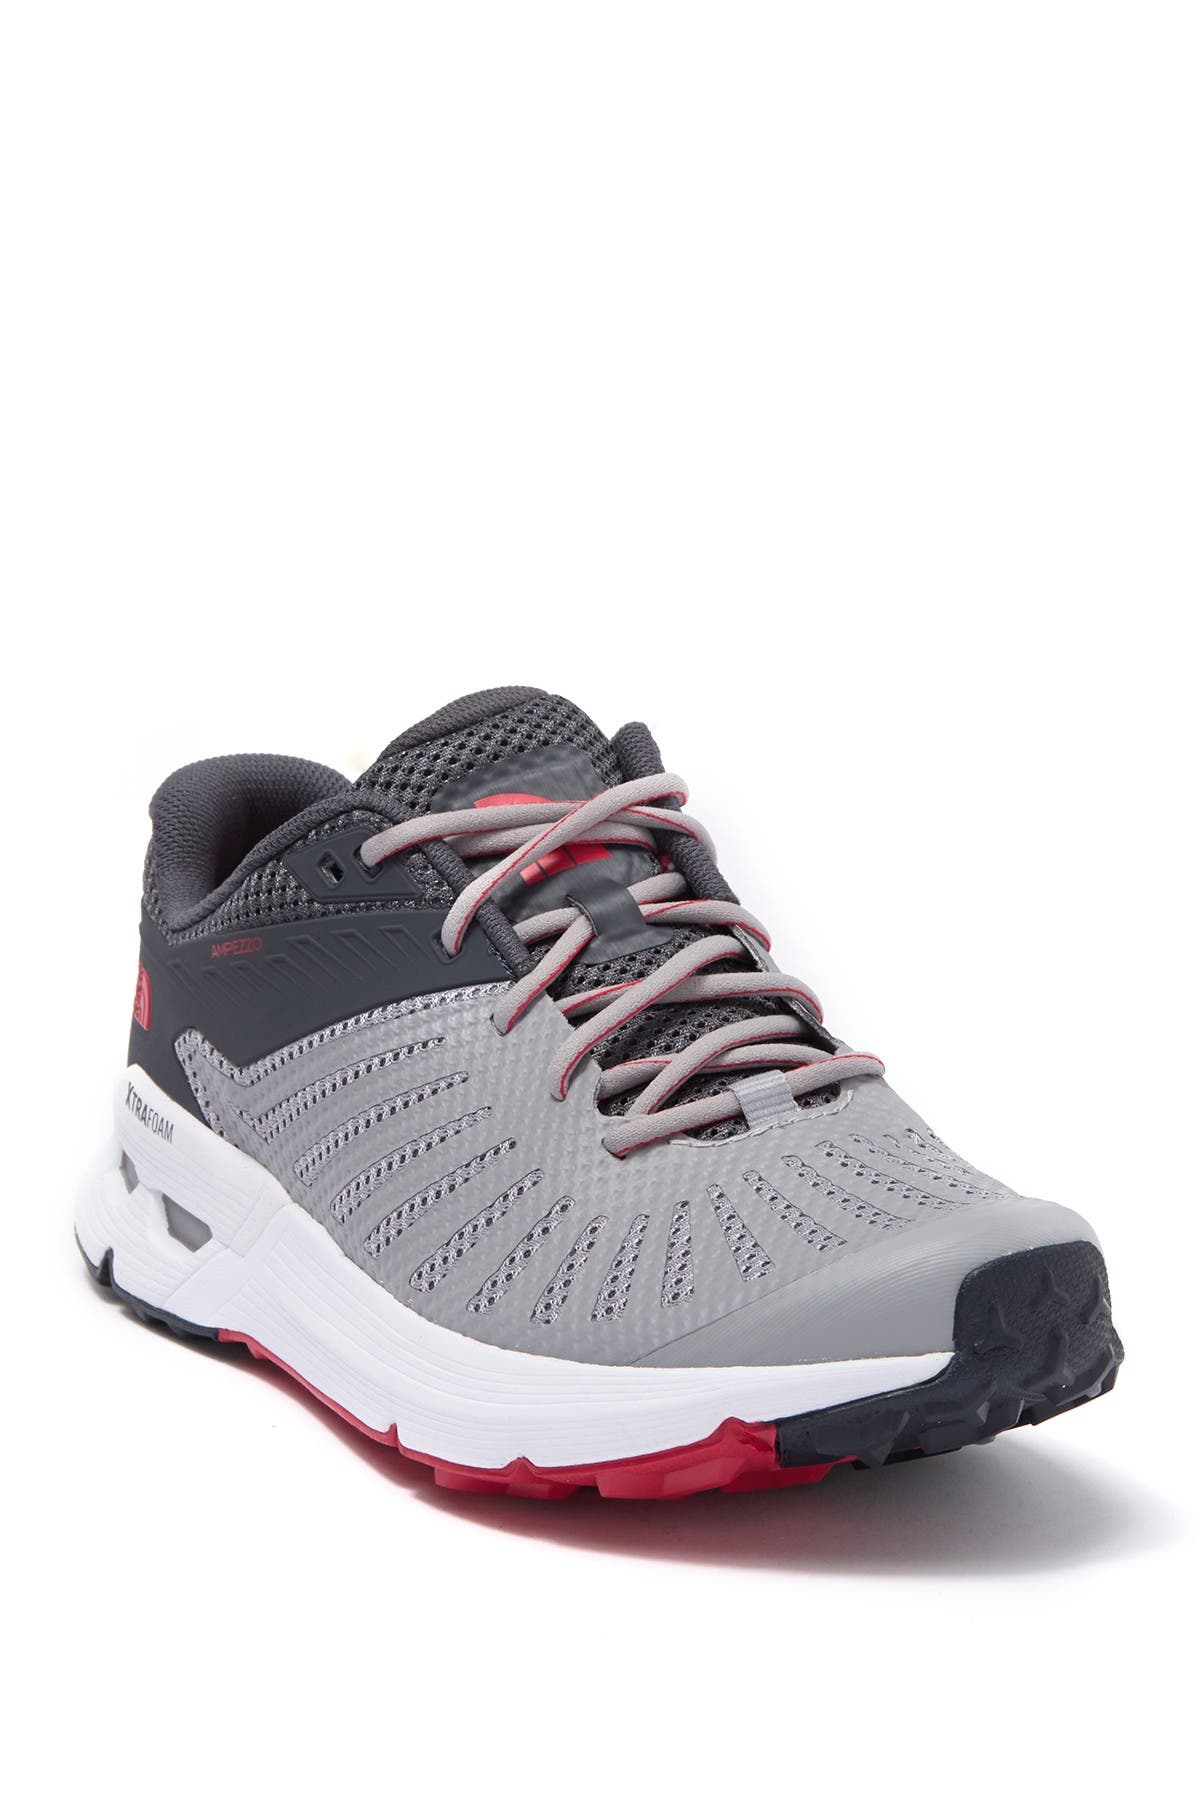 nordstrom rack trail running shoes